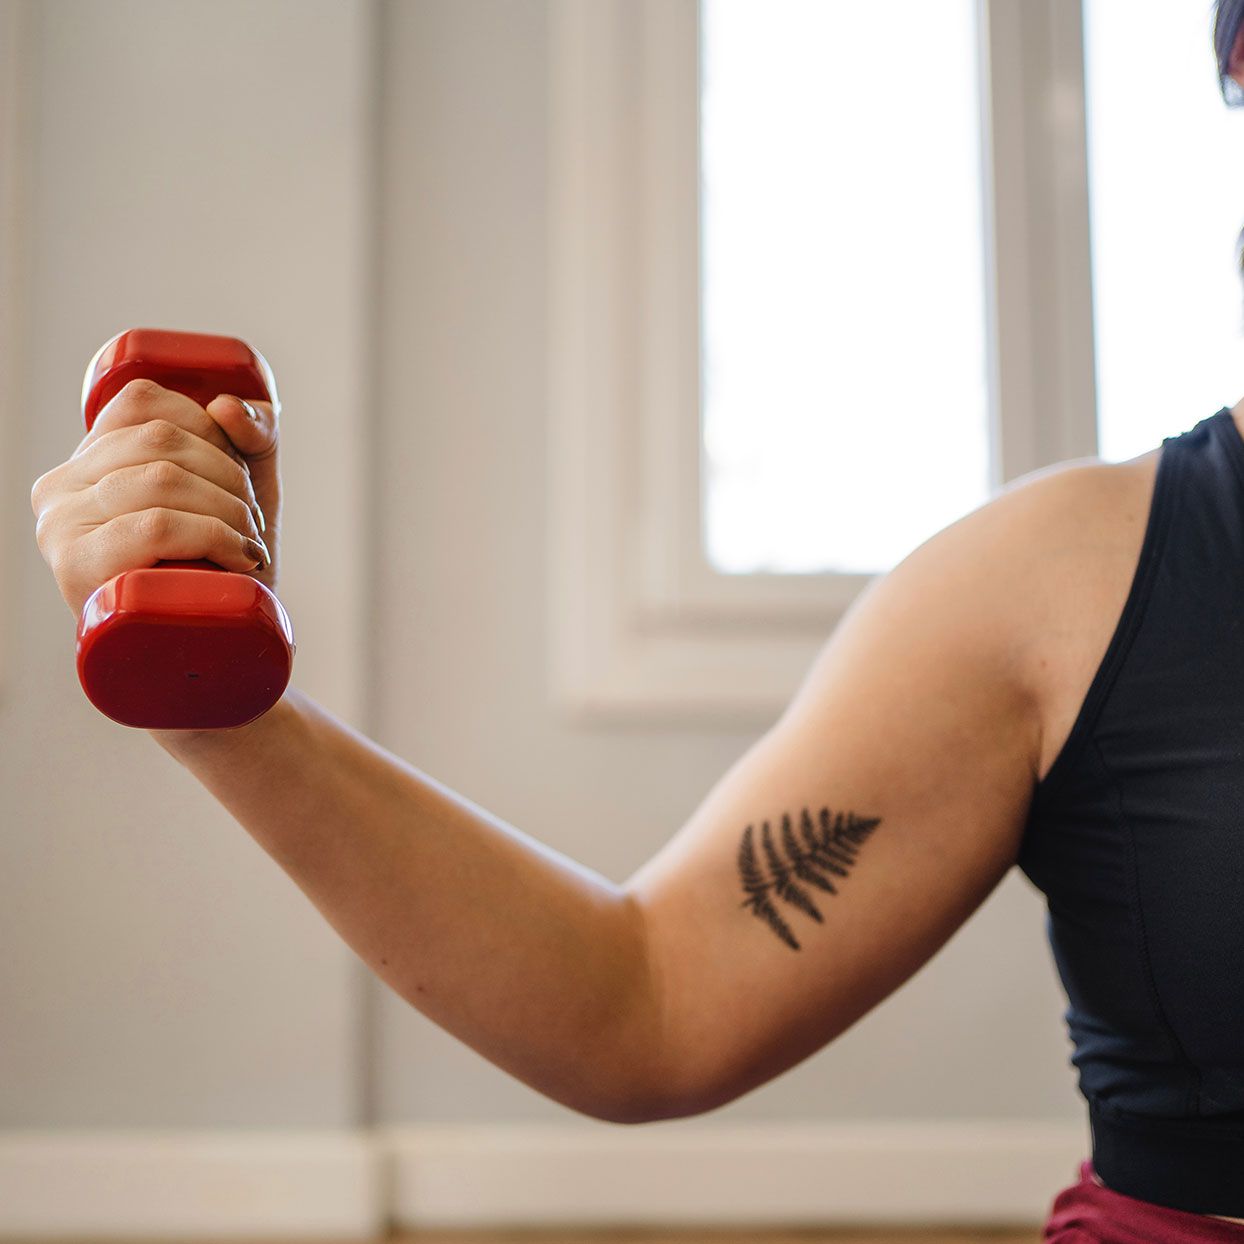 dumbbell-biceps-workout-woman-with-tattoo